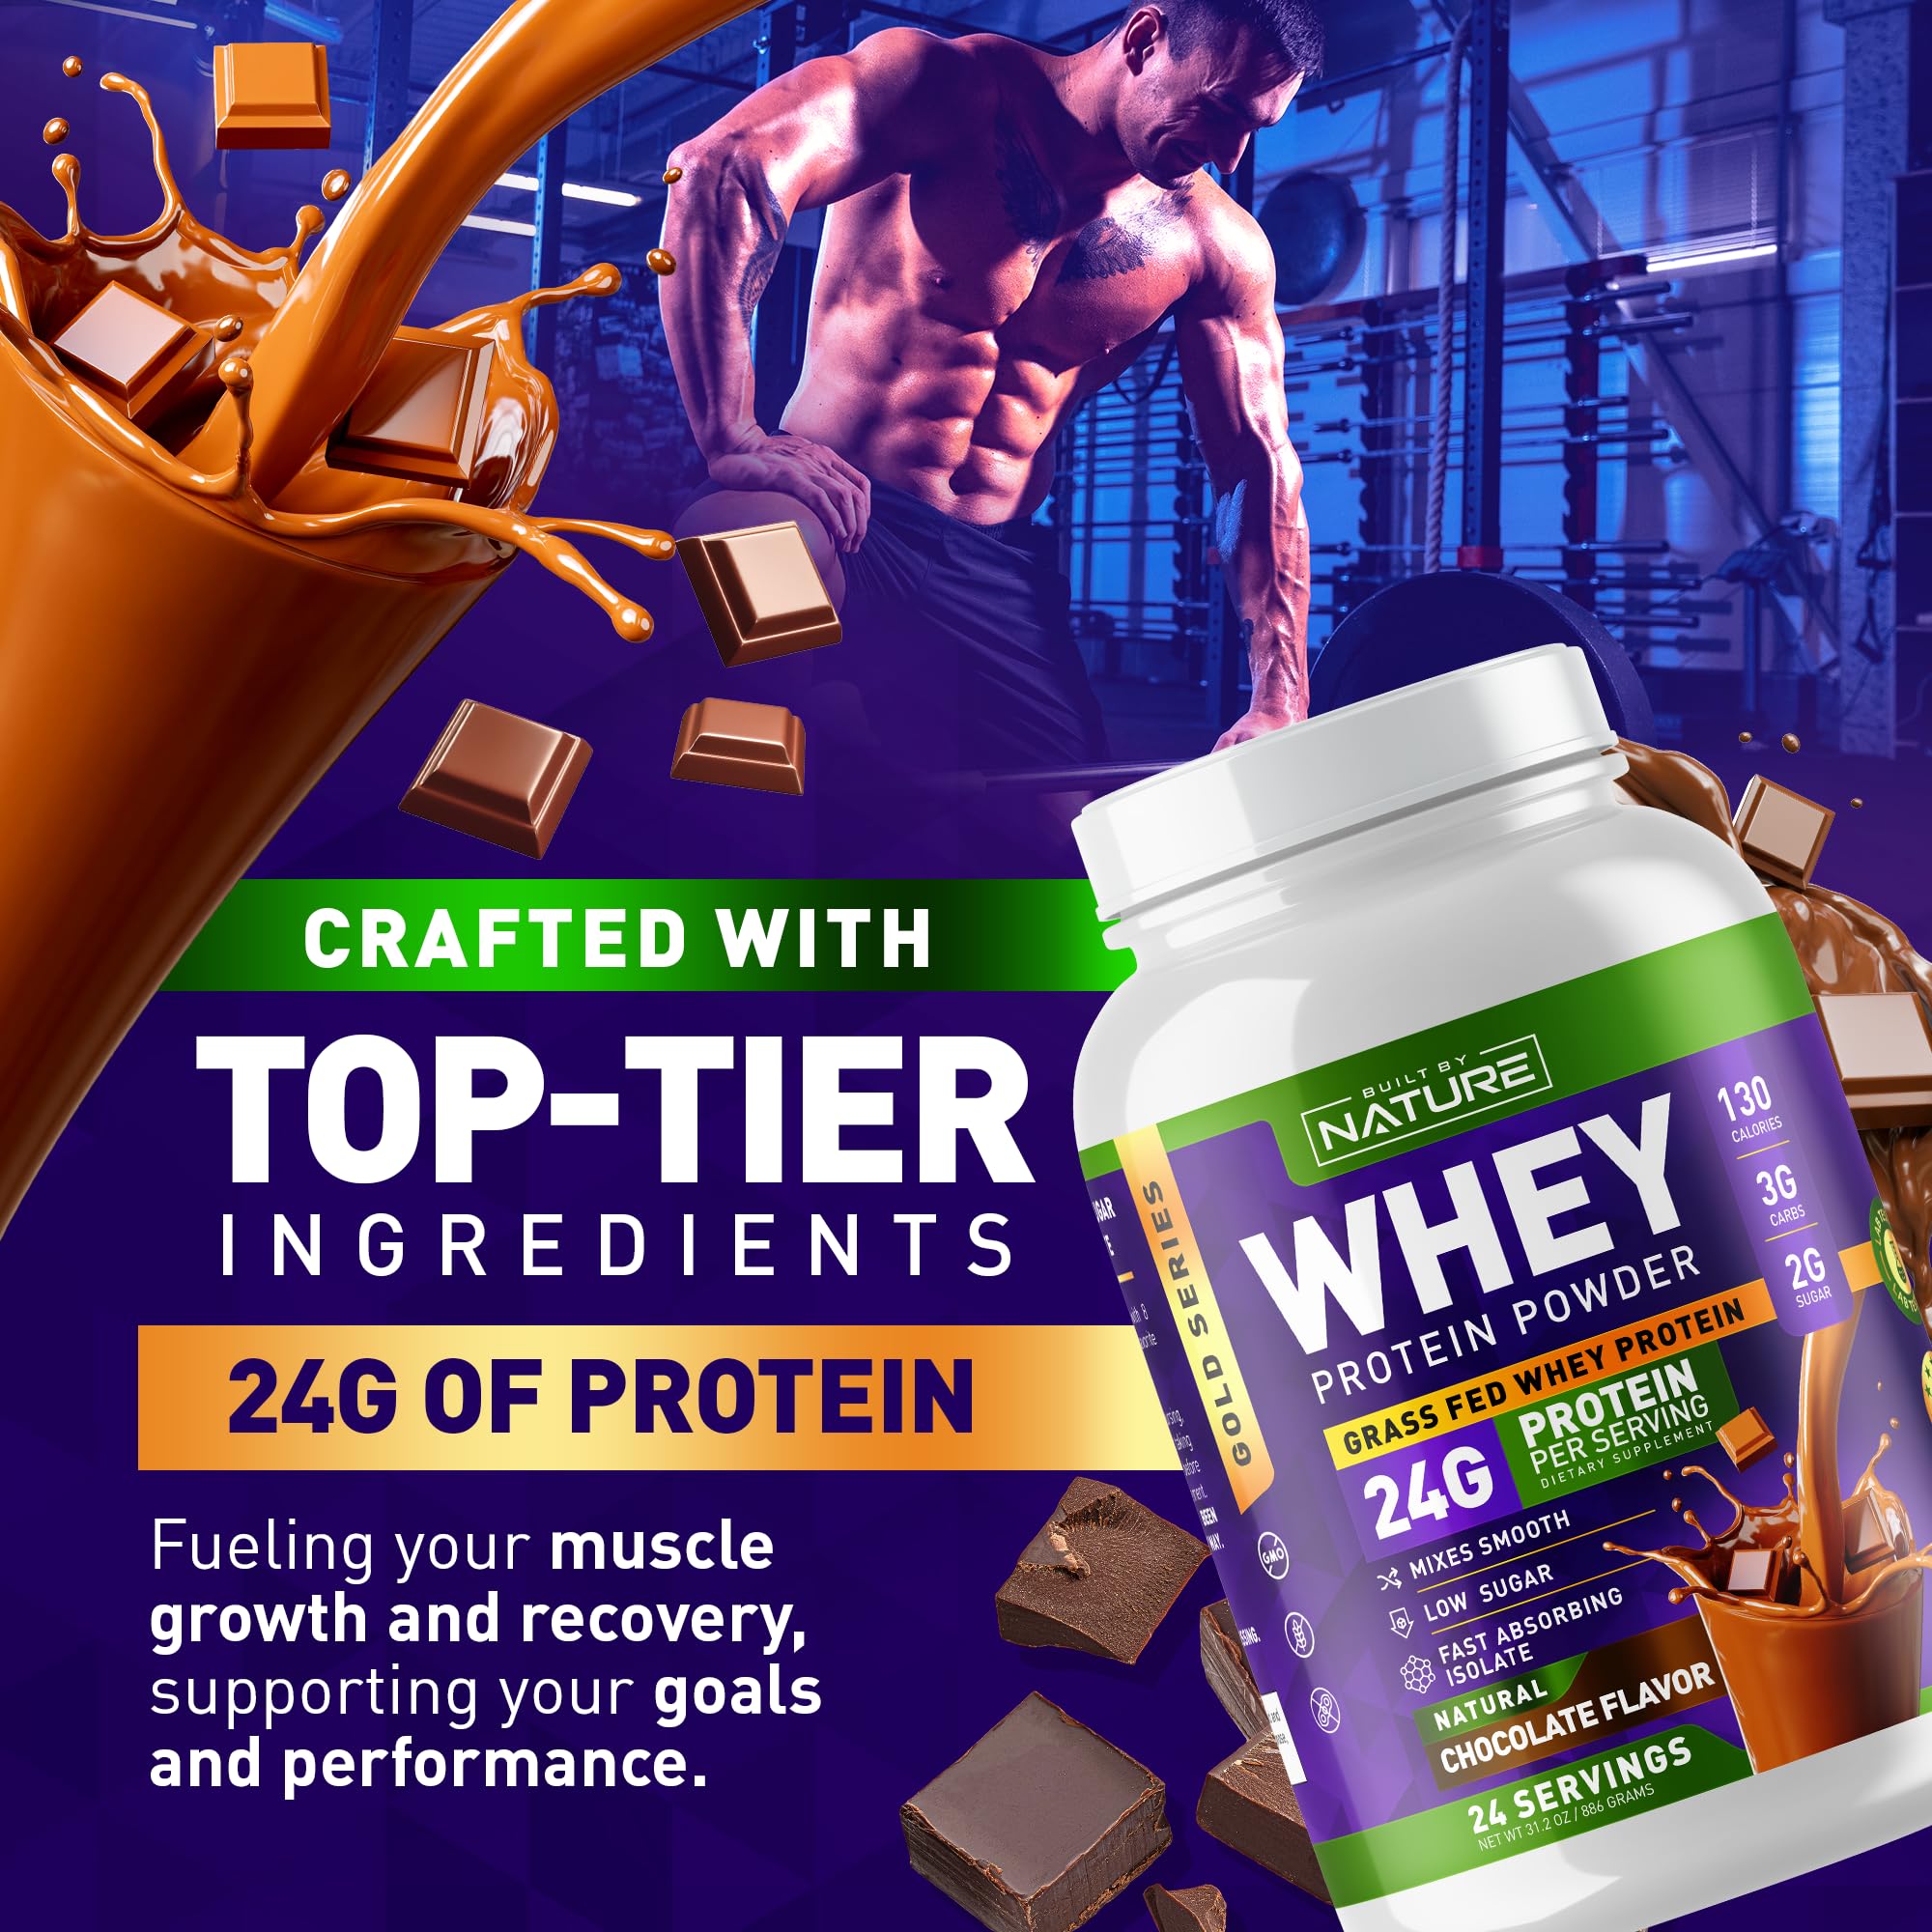 Built by Nature Whey Protein Powder - 100% Pure Whey Shake with Whey Isolate, Protein, No Bloating, Mixes Smooth, No Clumps or Chunks - High Protein, Low Sugar Drink